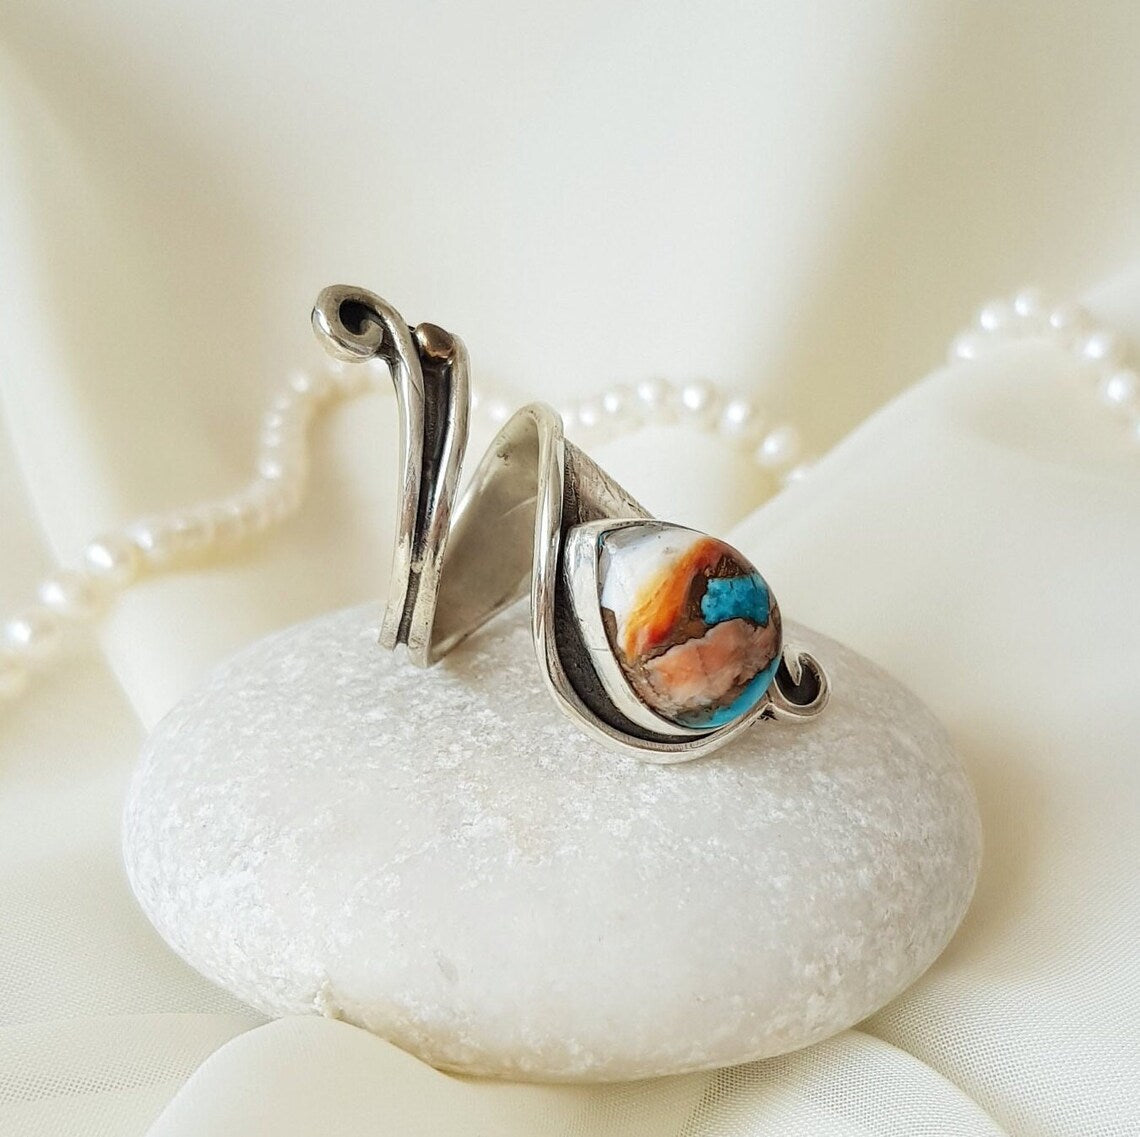 Vintage Teardrop Spiny Oyster Turquoise Wrap Rings - 925 Sterling Navajo Argent